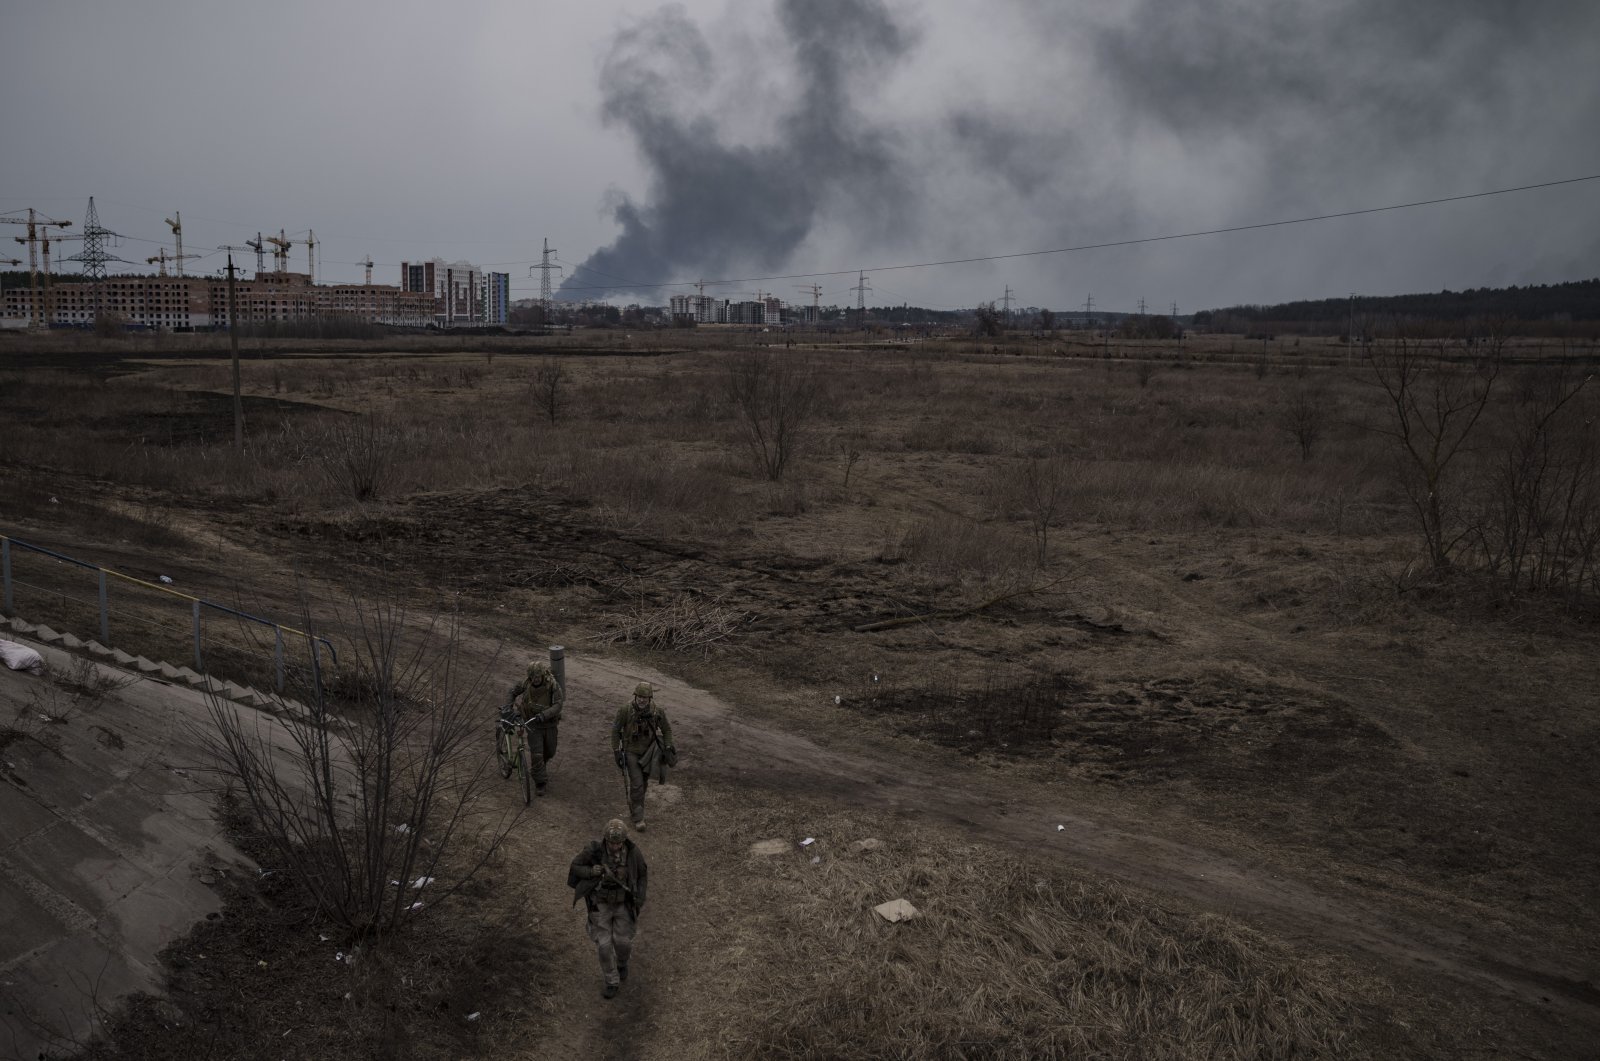 Soldiers walk on a path as smoke billows from the town of Irpin, on the outskirts of Kyiv, Ukraine, March 12, 2022. (AP Photo)